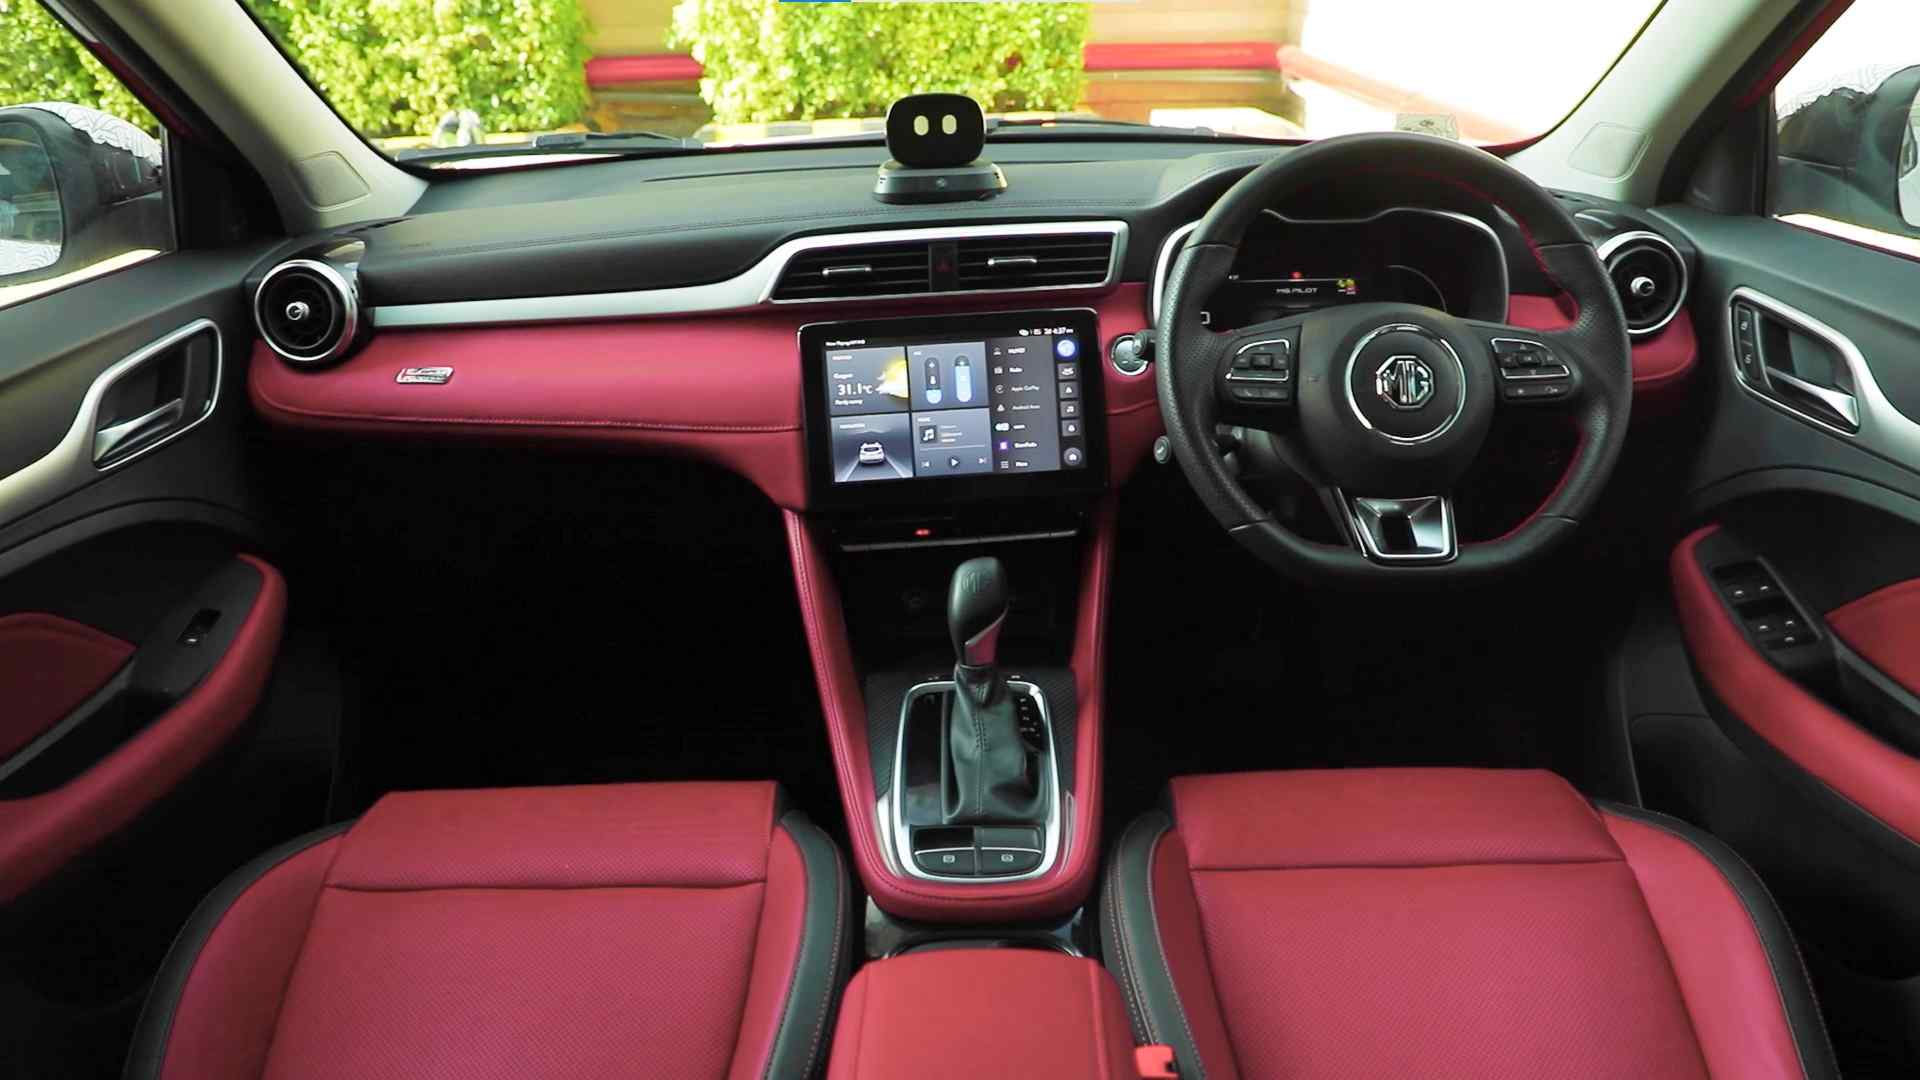 Black-and-maroon scheme will be an acquired taste; high-quality materials used on the dash. Image: MG